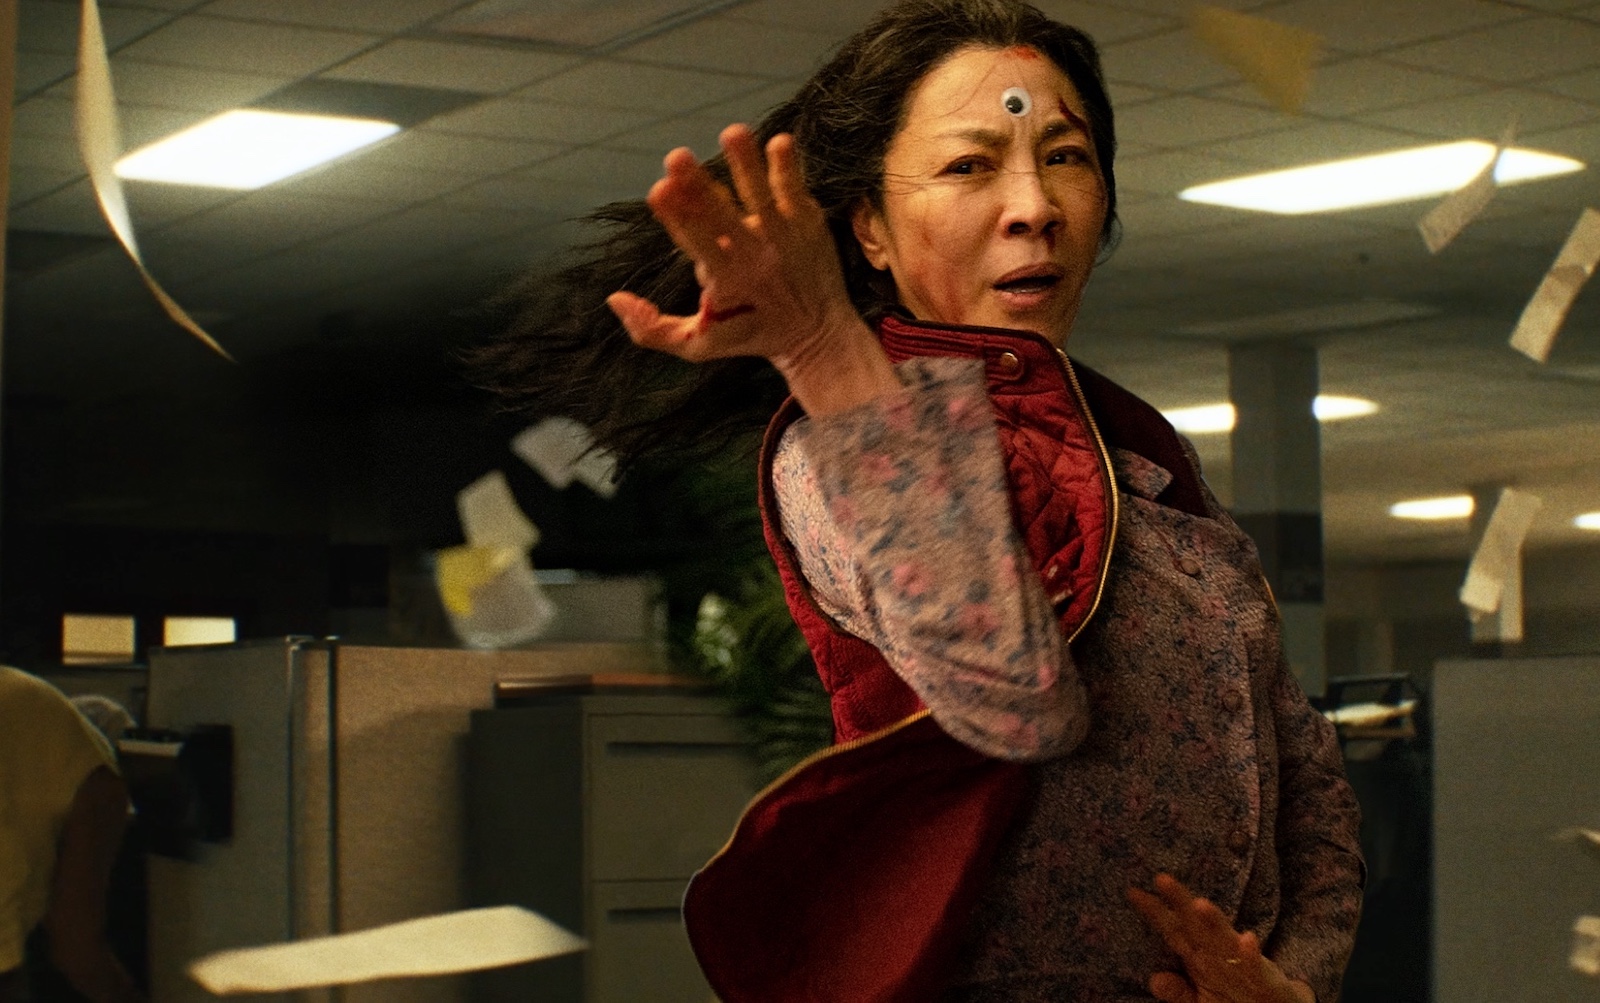 a fierce malaysian woman, actress michelle yeoh, portrays a middle-aged chinese immigrant and laundromat owner. she adorns a goofy google-y eye on her forehead and stands in a martial arts position, ready to fight